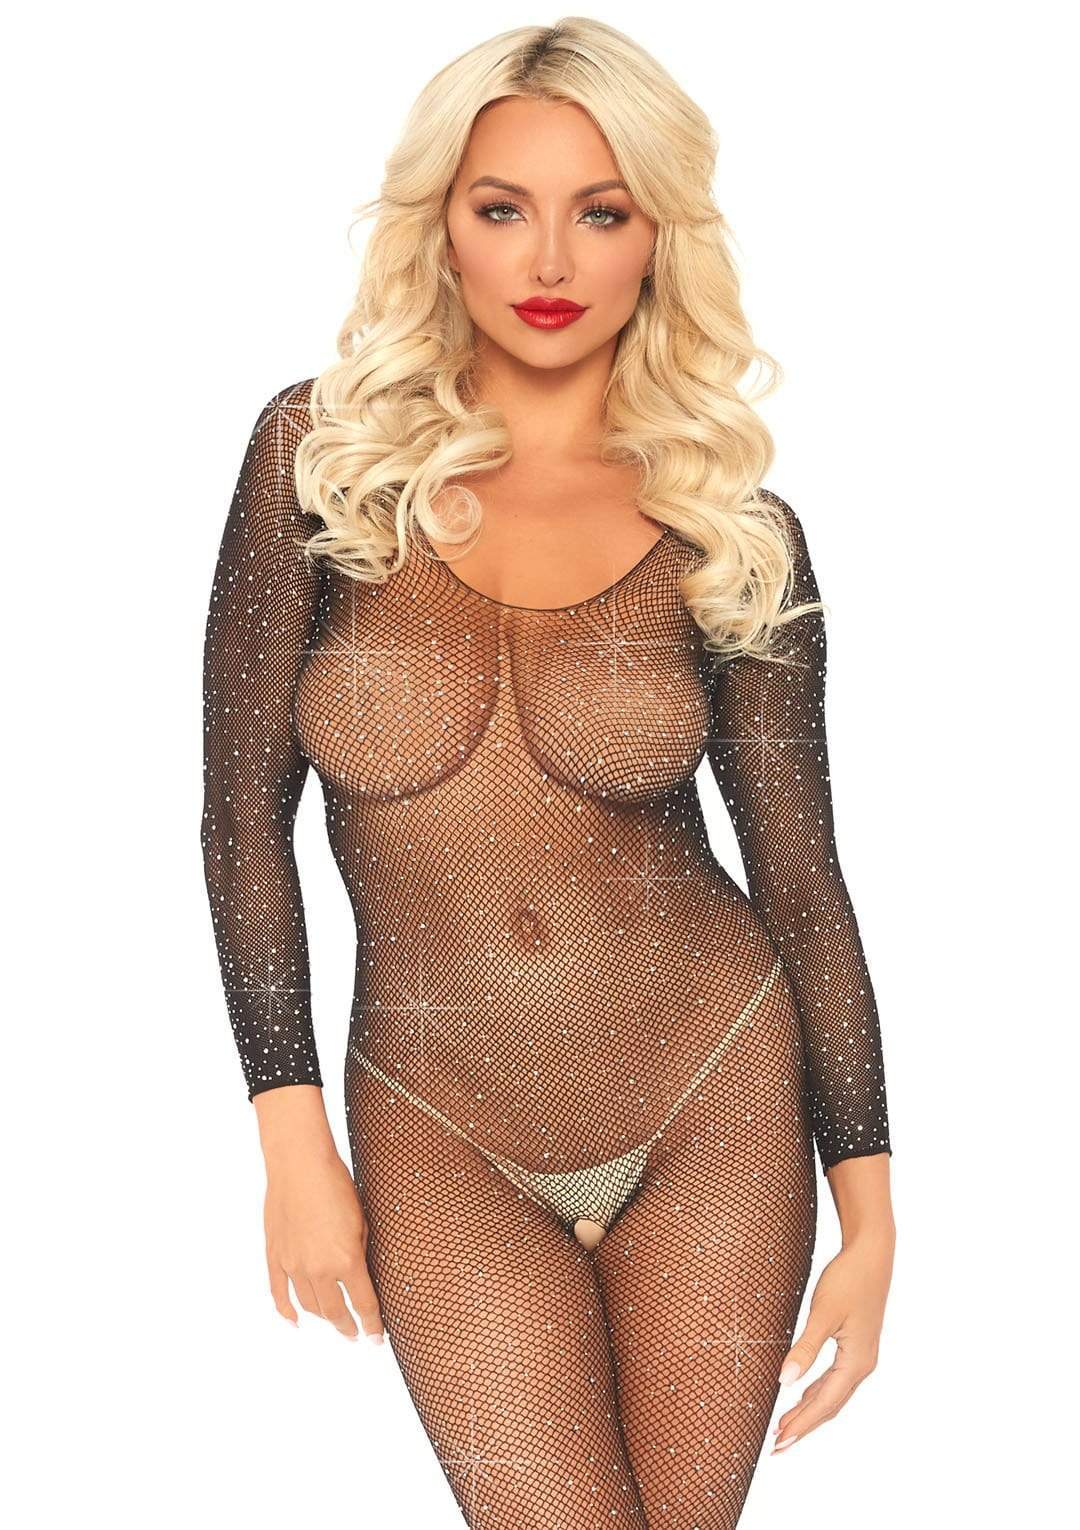 Model wearing the Crystalized Seamless Fishnet Bodystocking.